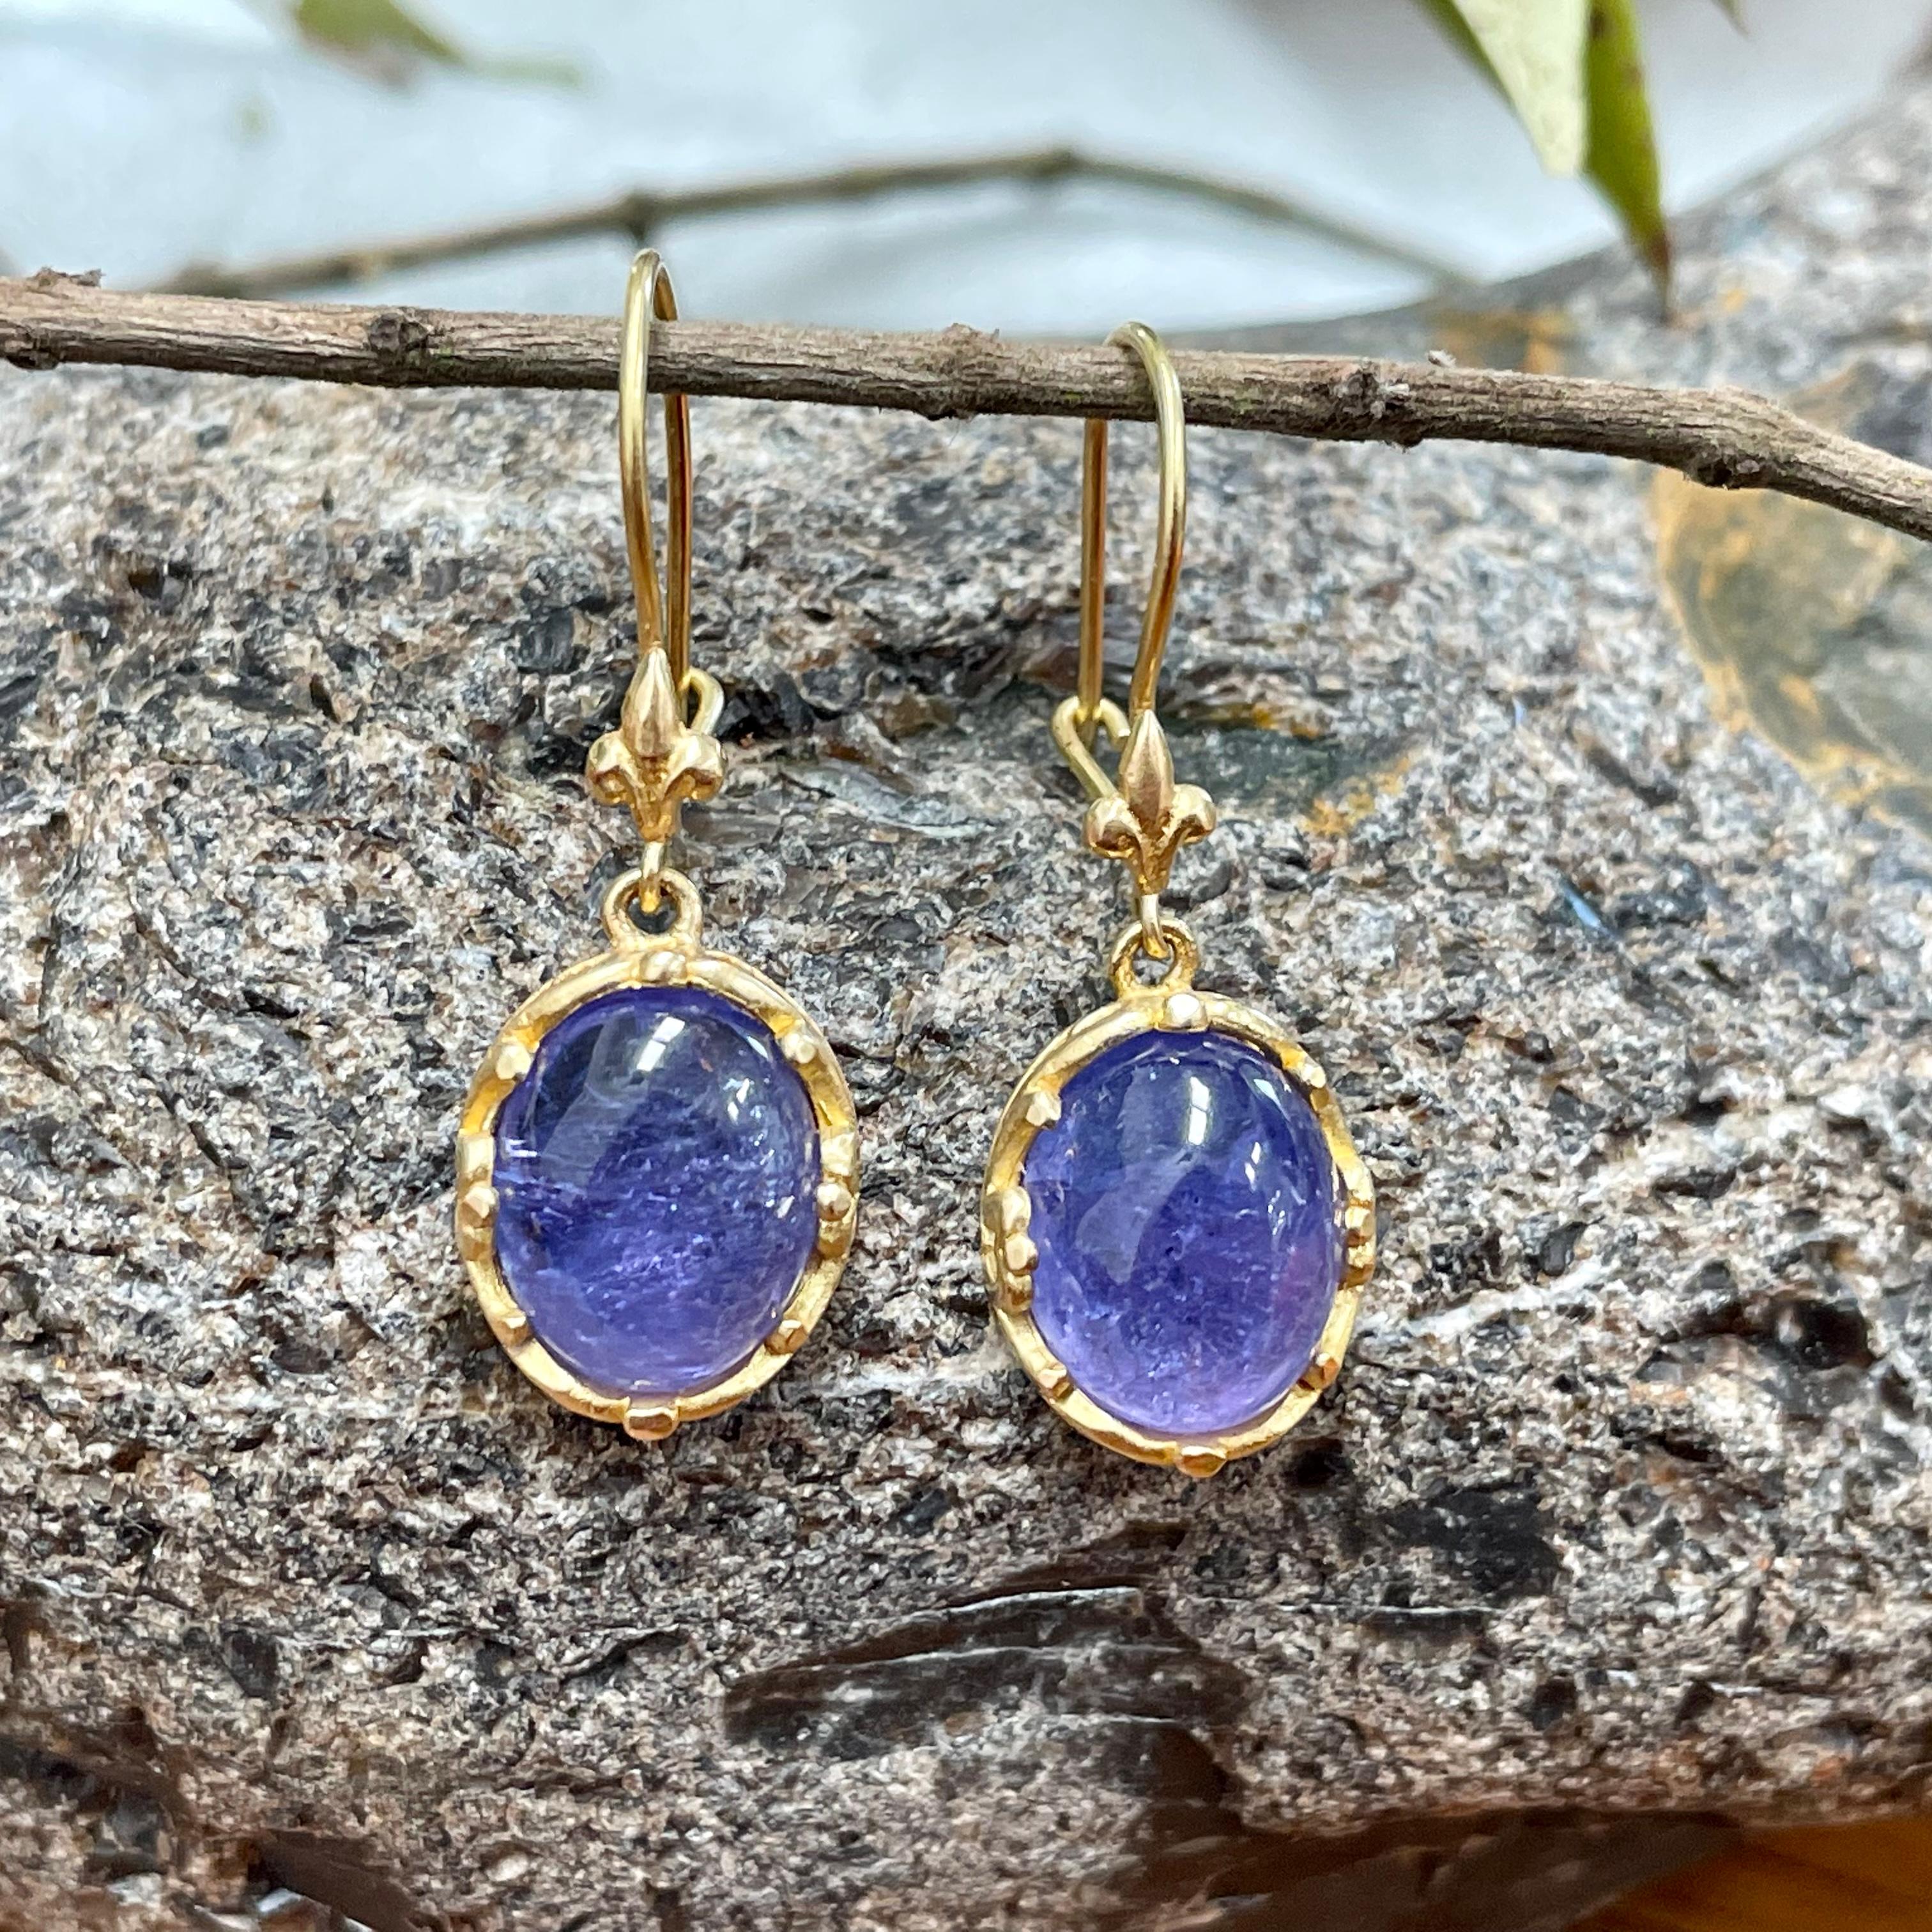 Two 8 x 10 mm oval tanzanite cabochons are held in delicately carved bezels below fleur de leu ornamented 18K safety clasp wires. Beautiful contrast between the purple/blue of the stones and the gold. 